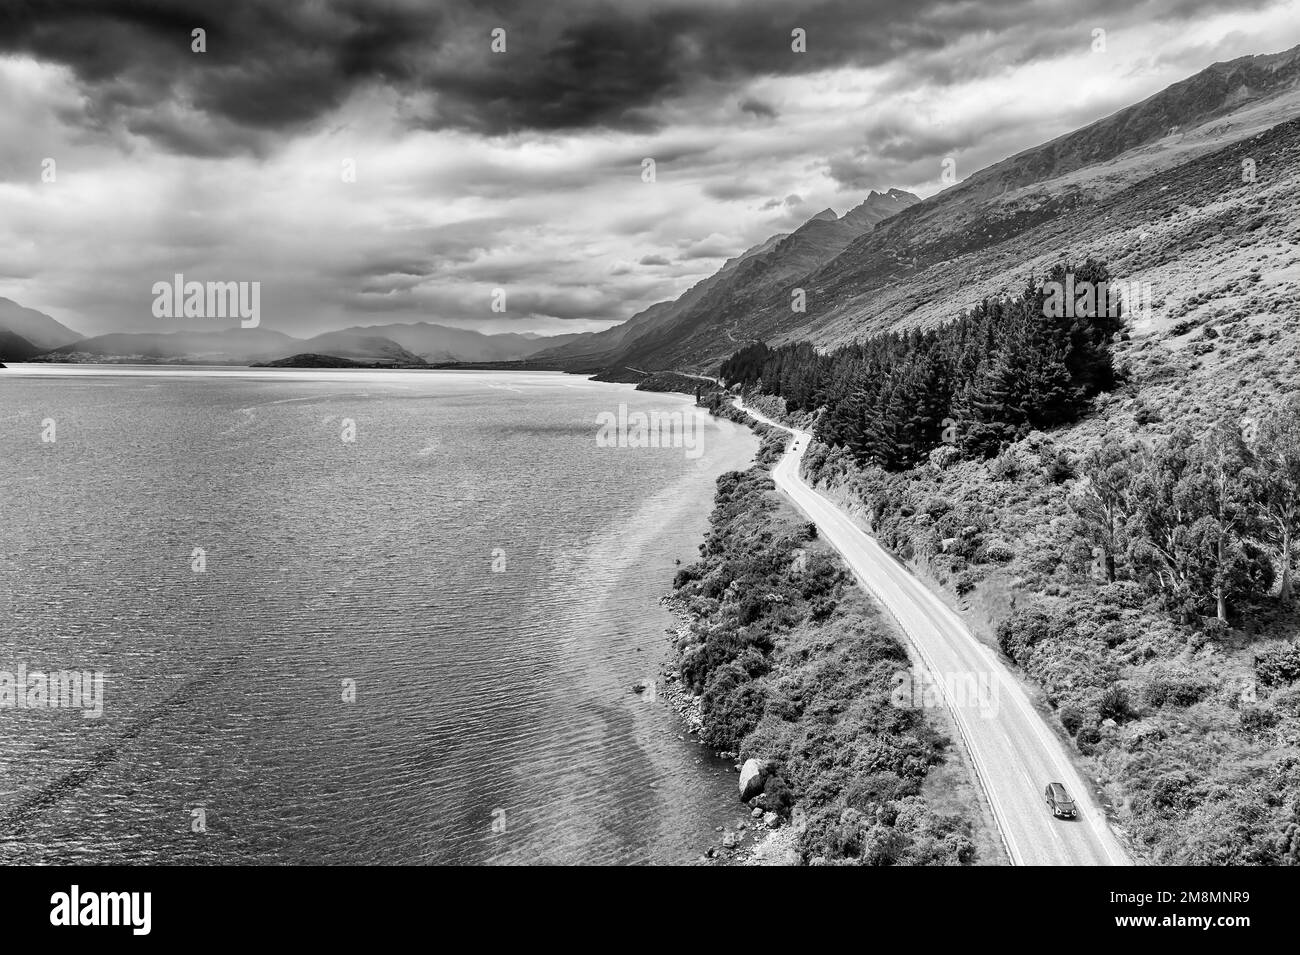 Dramatic high contrast black white view of car on Highway 6 along Lake Wkatipu in Otago of New Zealand - scenic aerial landscape. Stock Photo